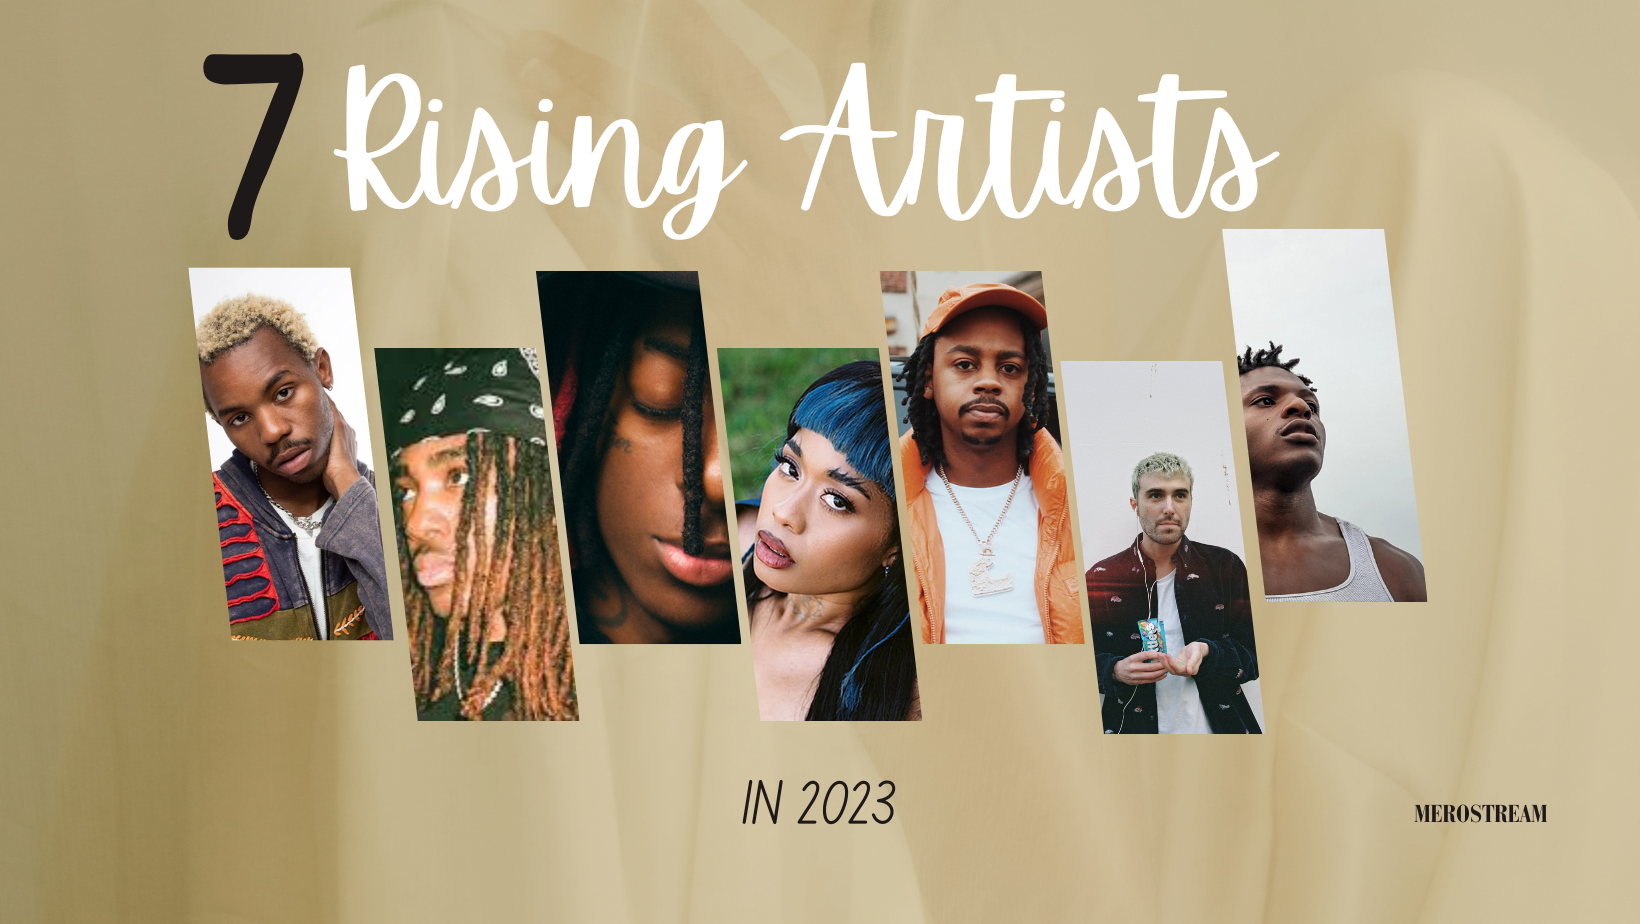 7 Rising Artistes to Watch Out For in 2023